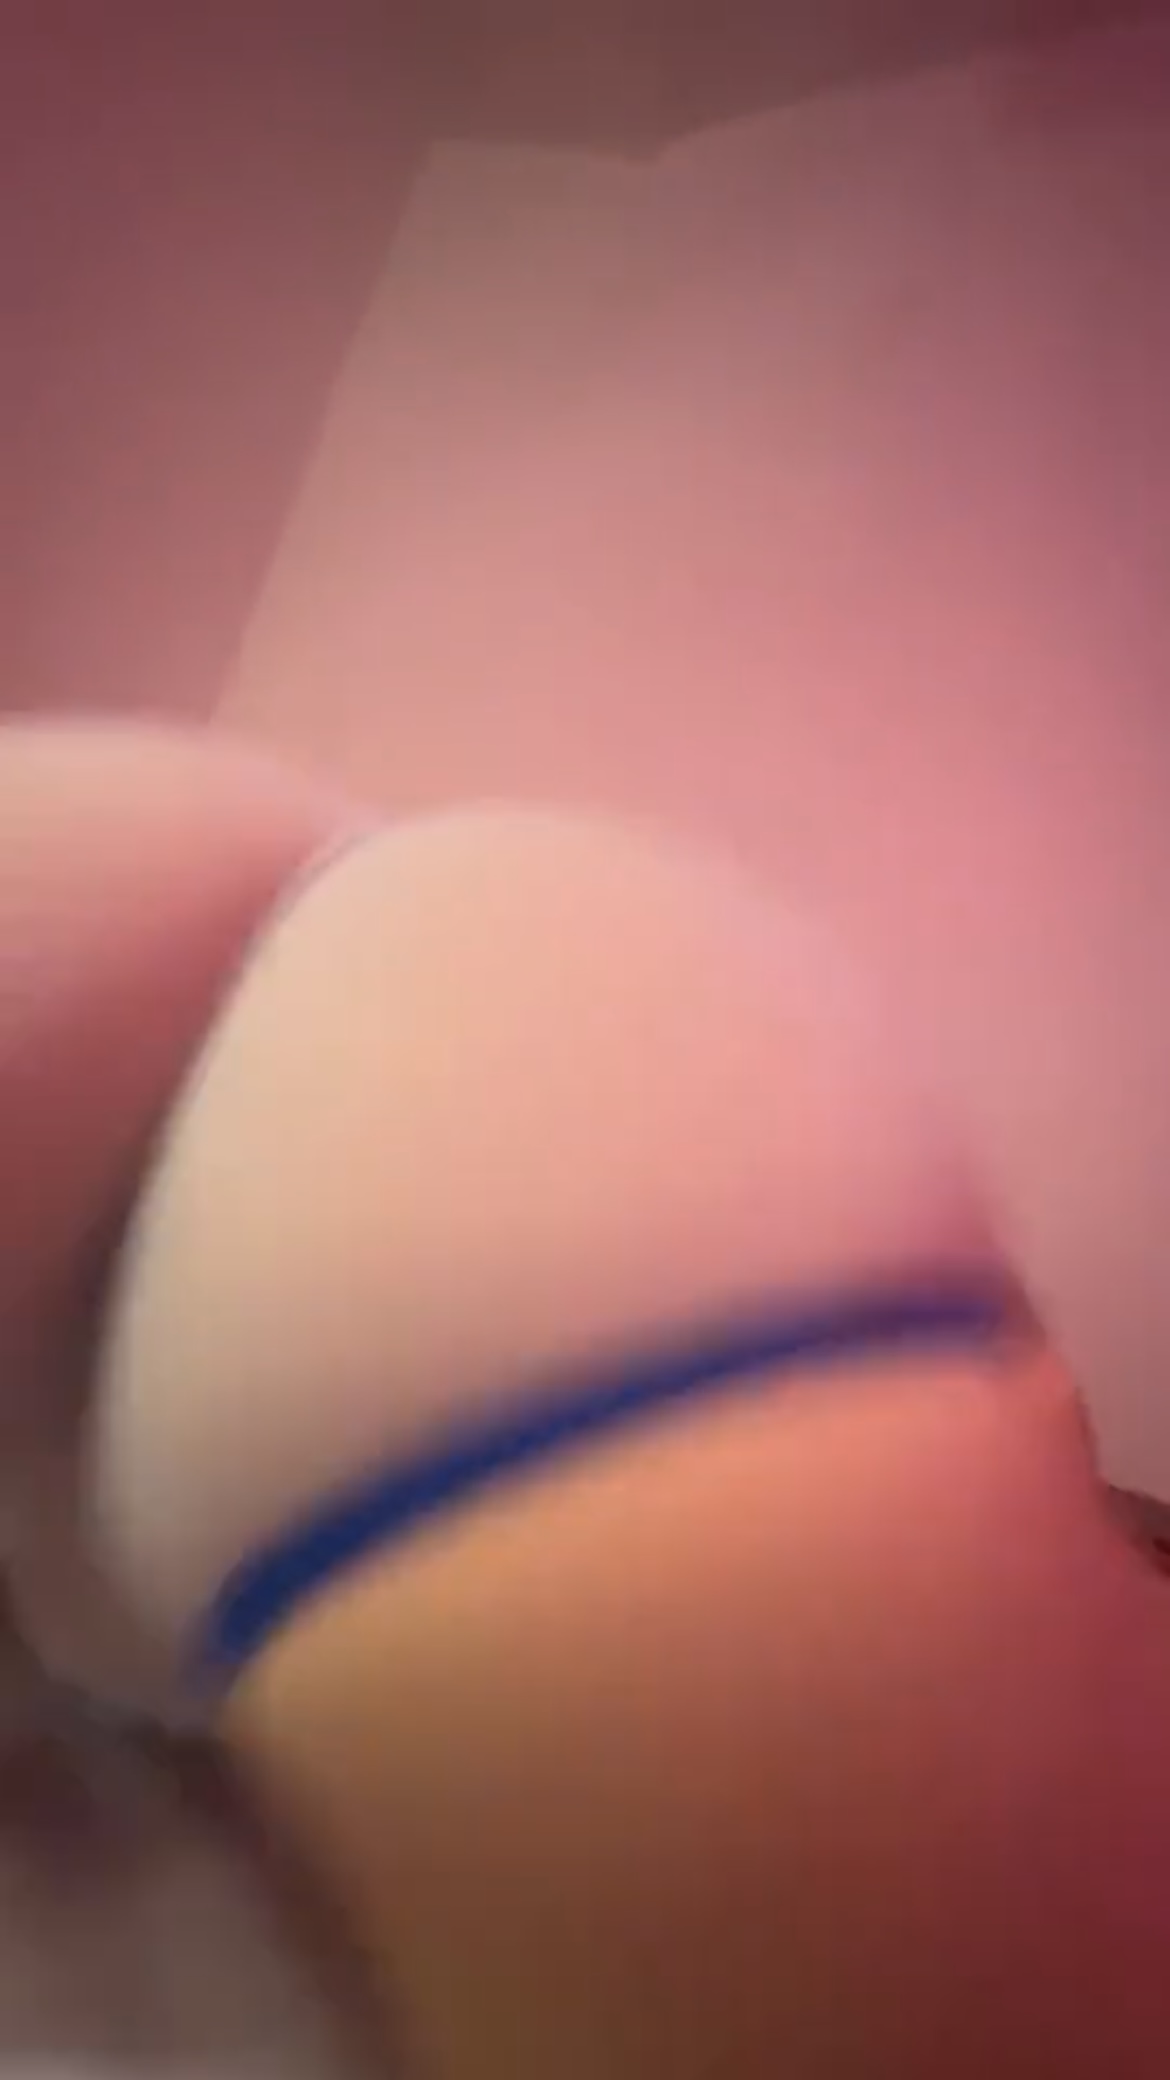 POV: shoving your face in a twerking bussy